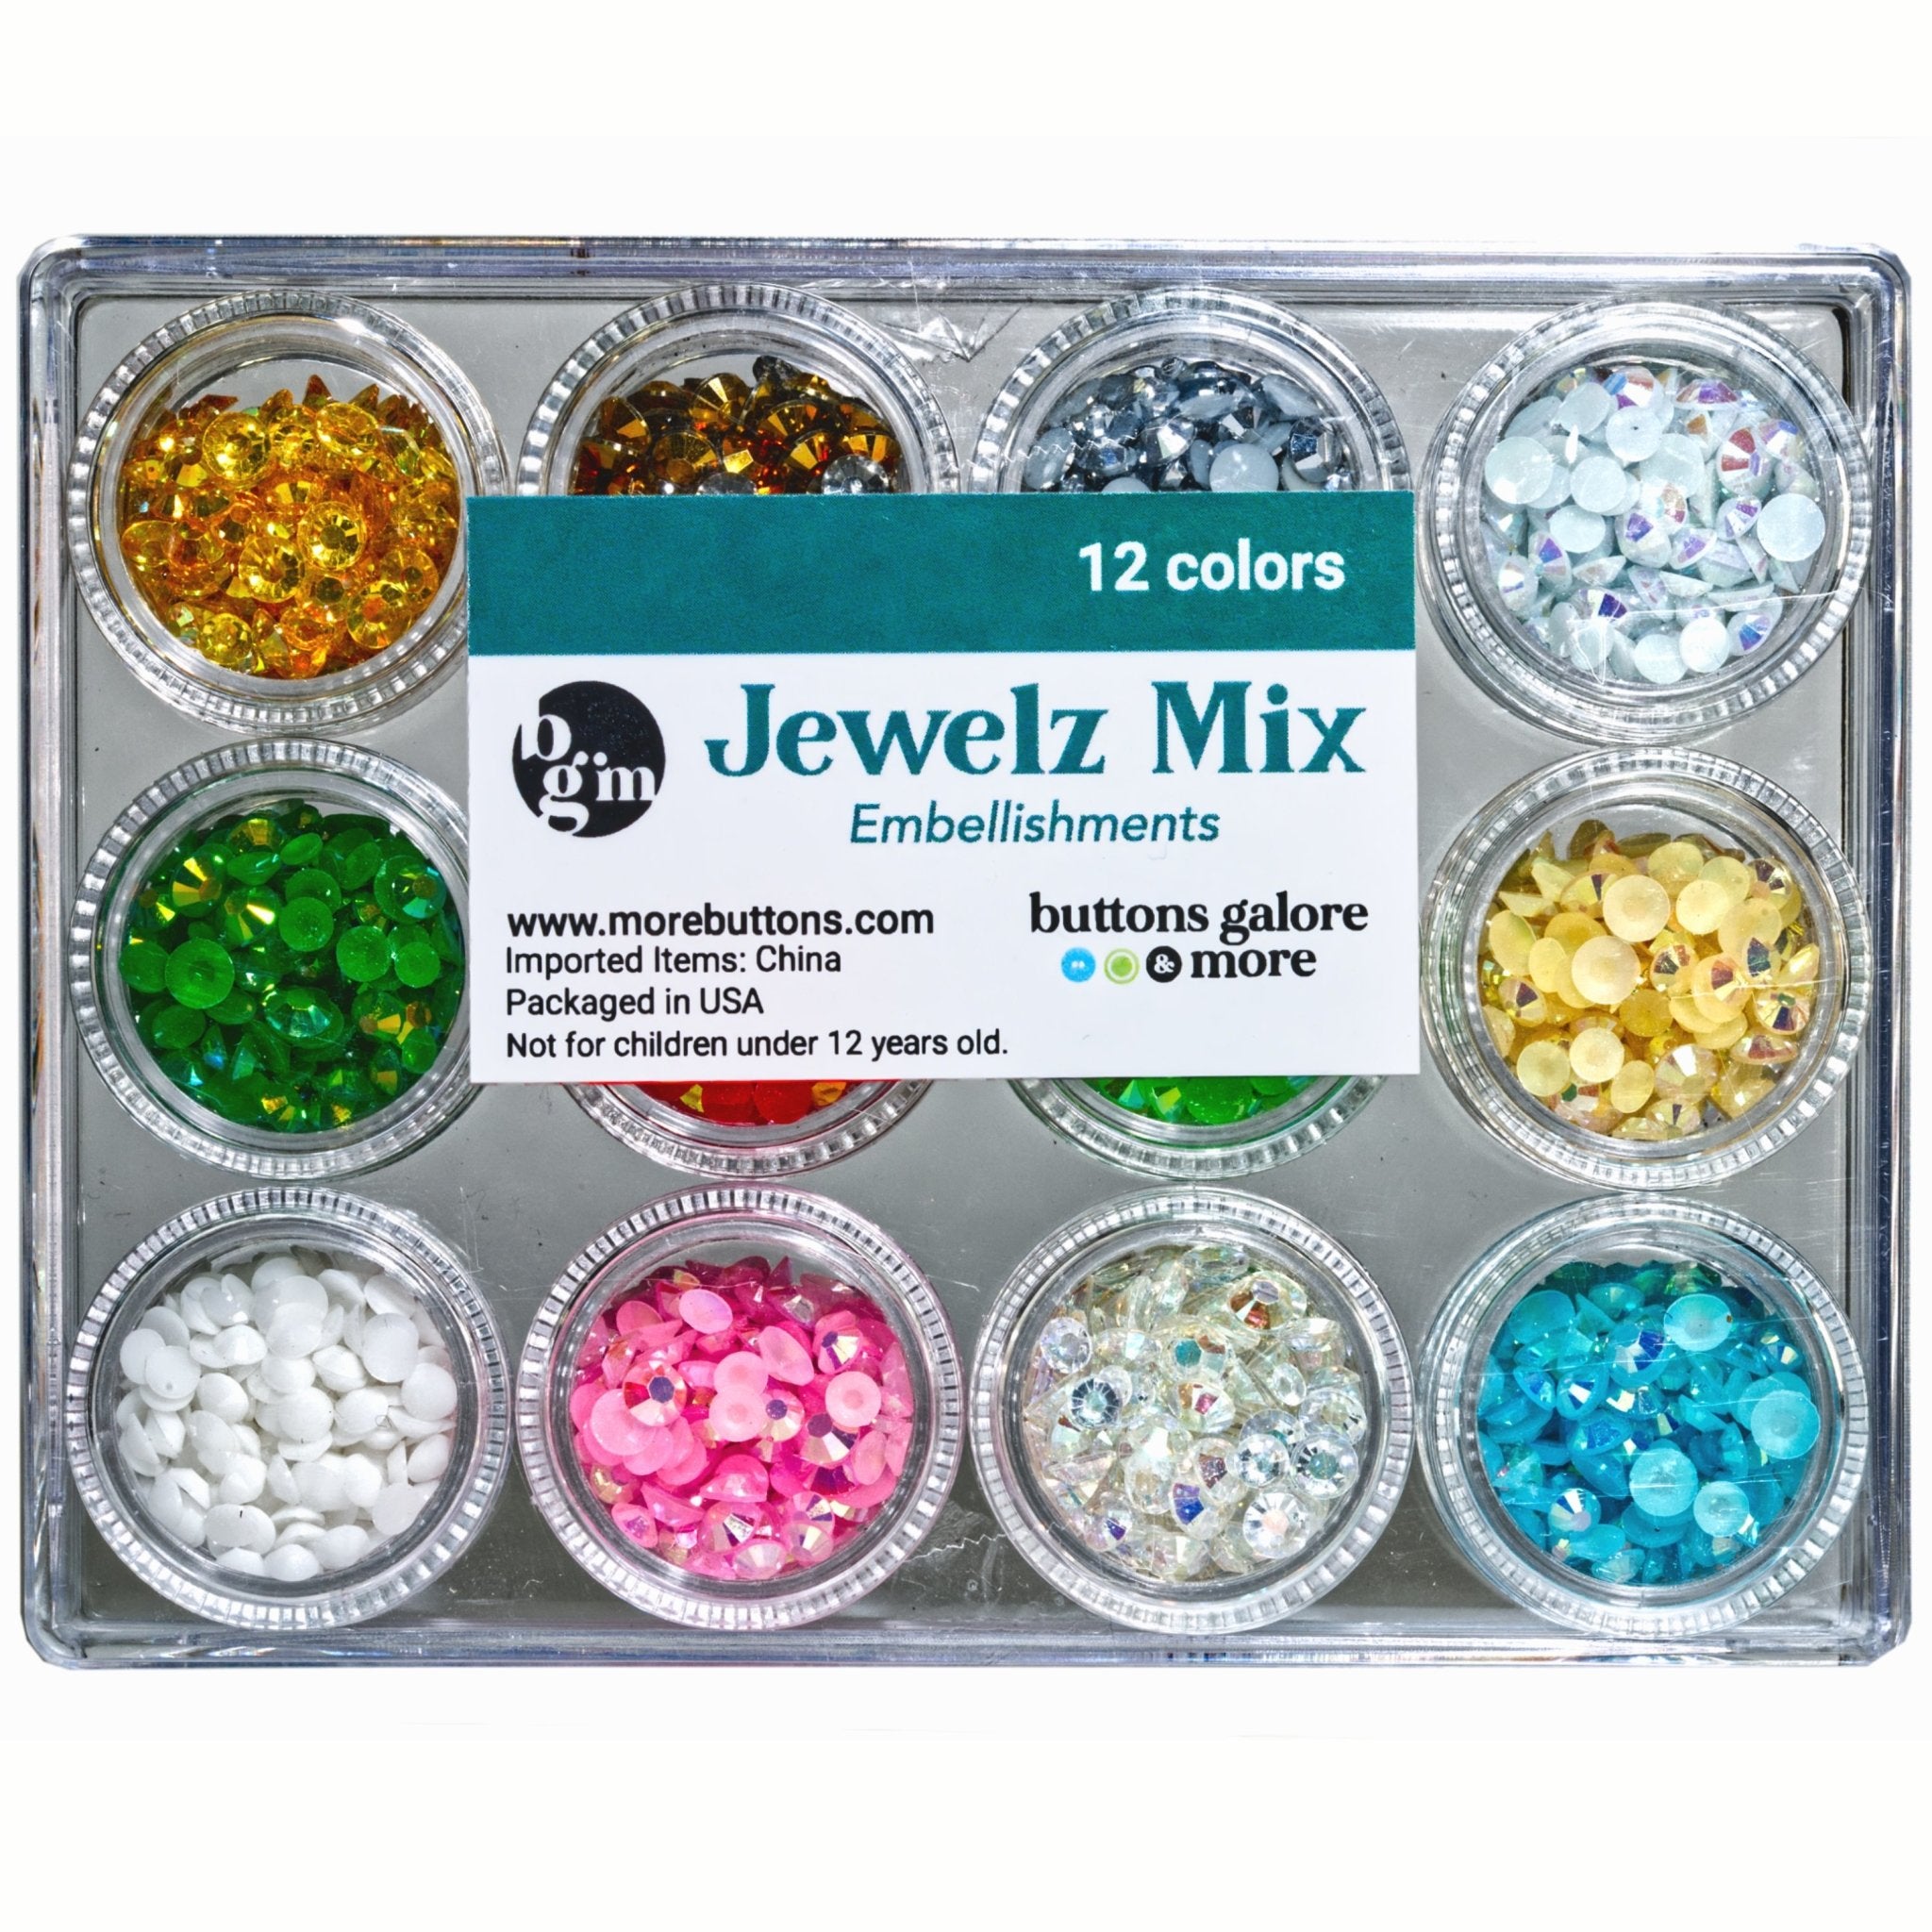 Holiday Jewelz Mix - Buttons Galore and More